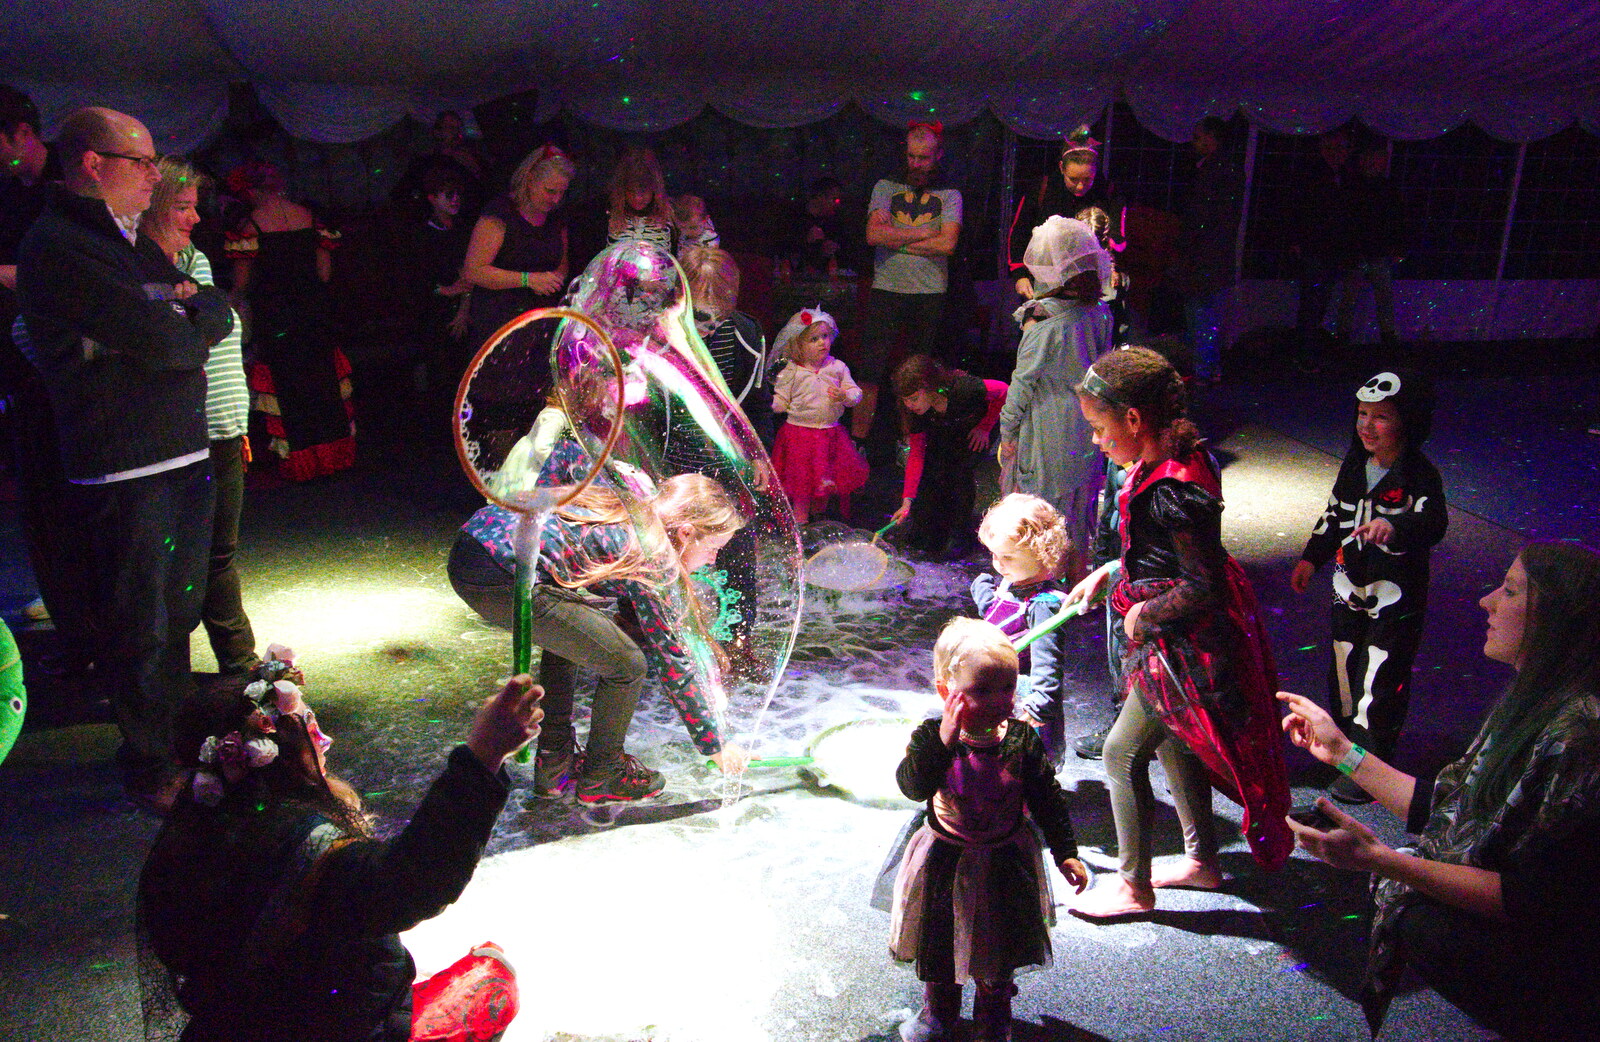 More bubble messing from Day of the Dead Party at the Oaksmere, Brome, Suffolk - 2nd November 2019